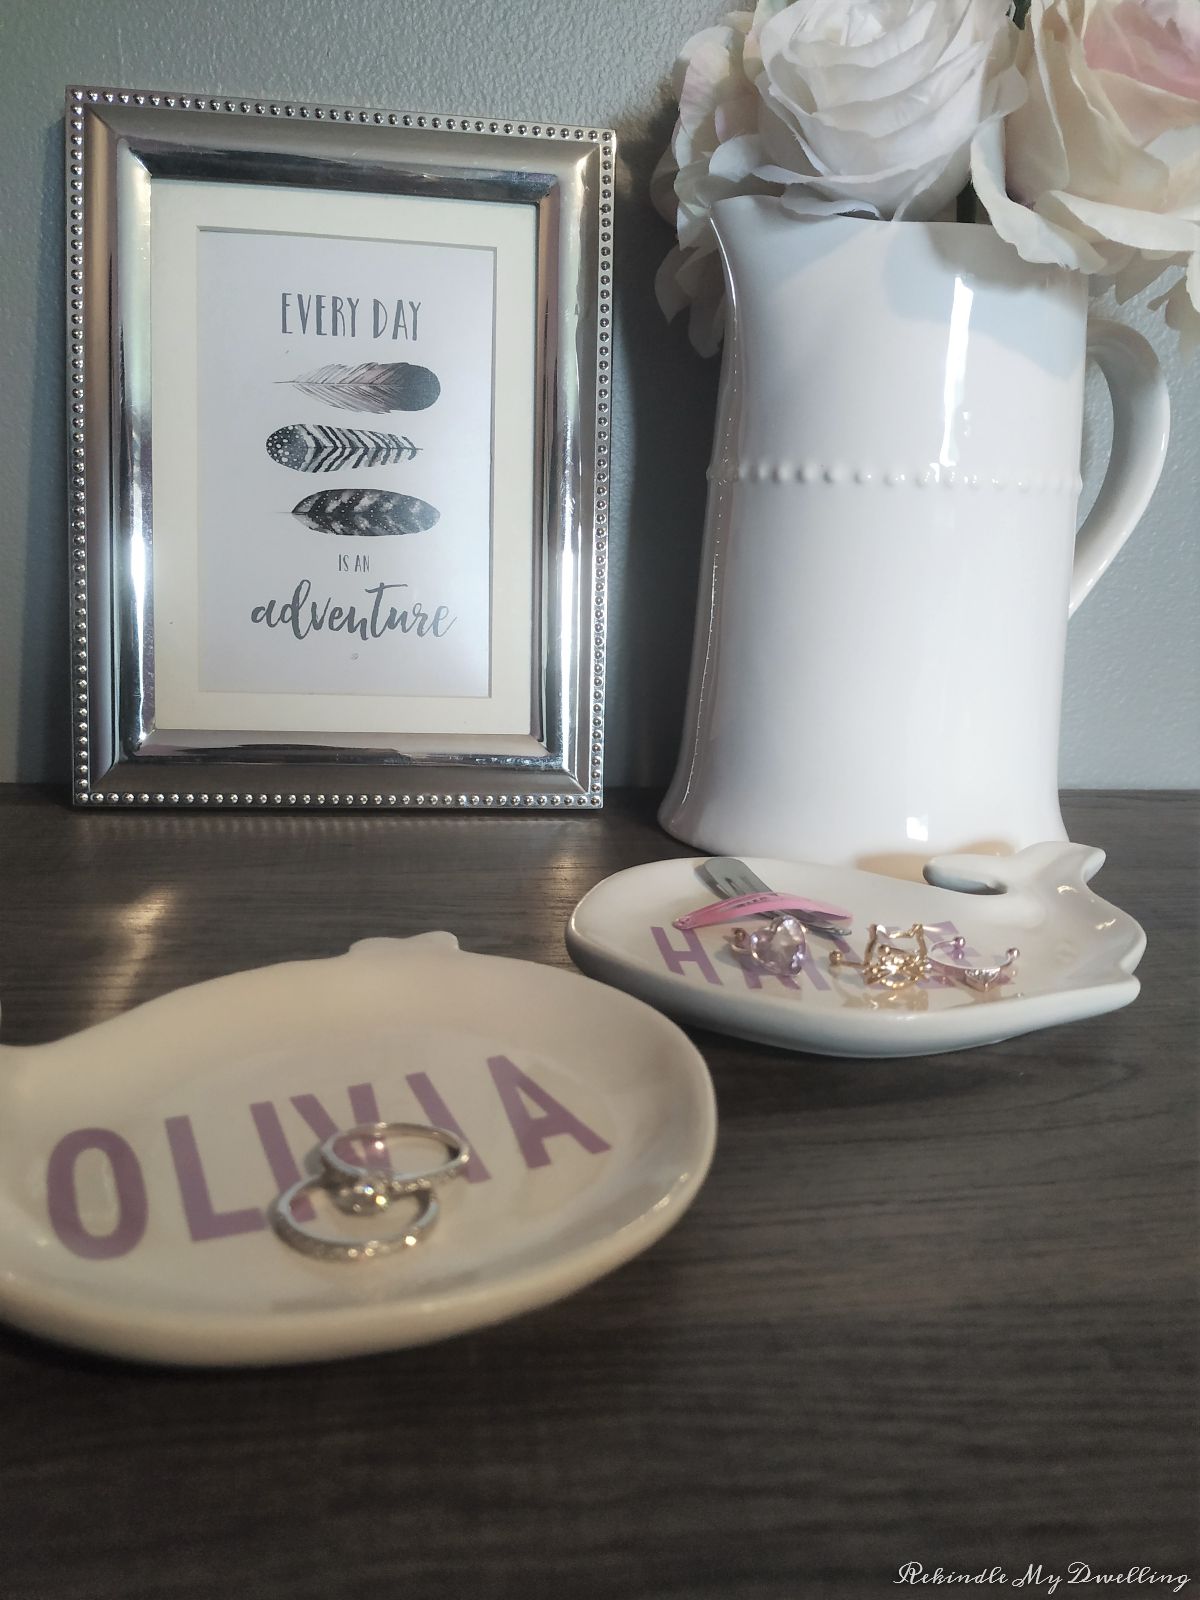 Personalized trinket dishes next to a vase with flowers and a pciture frame.